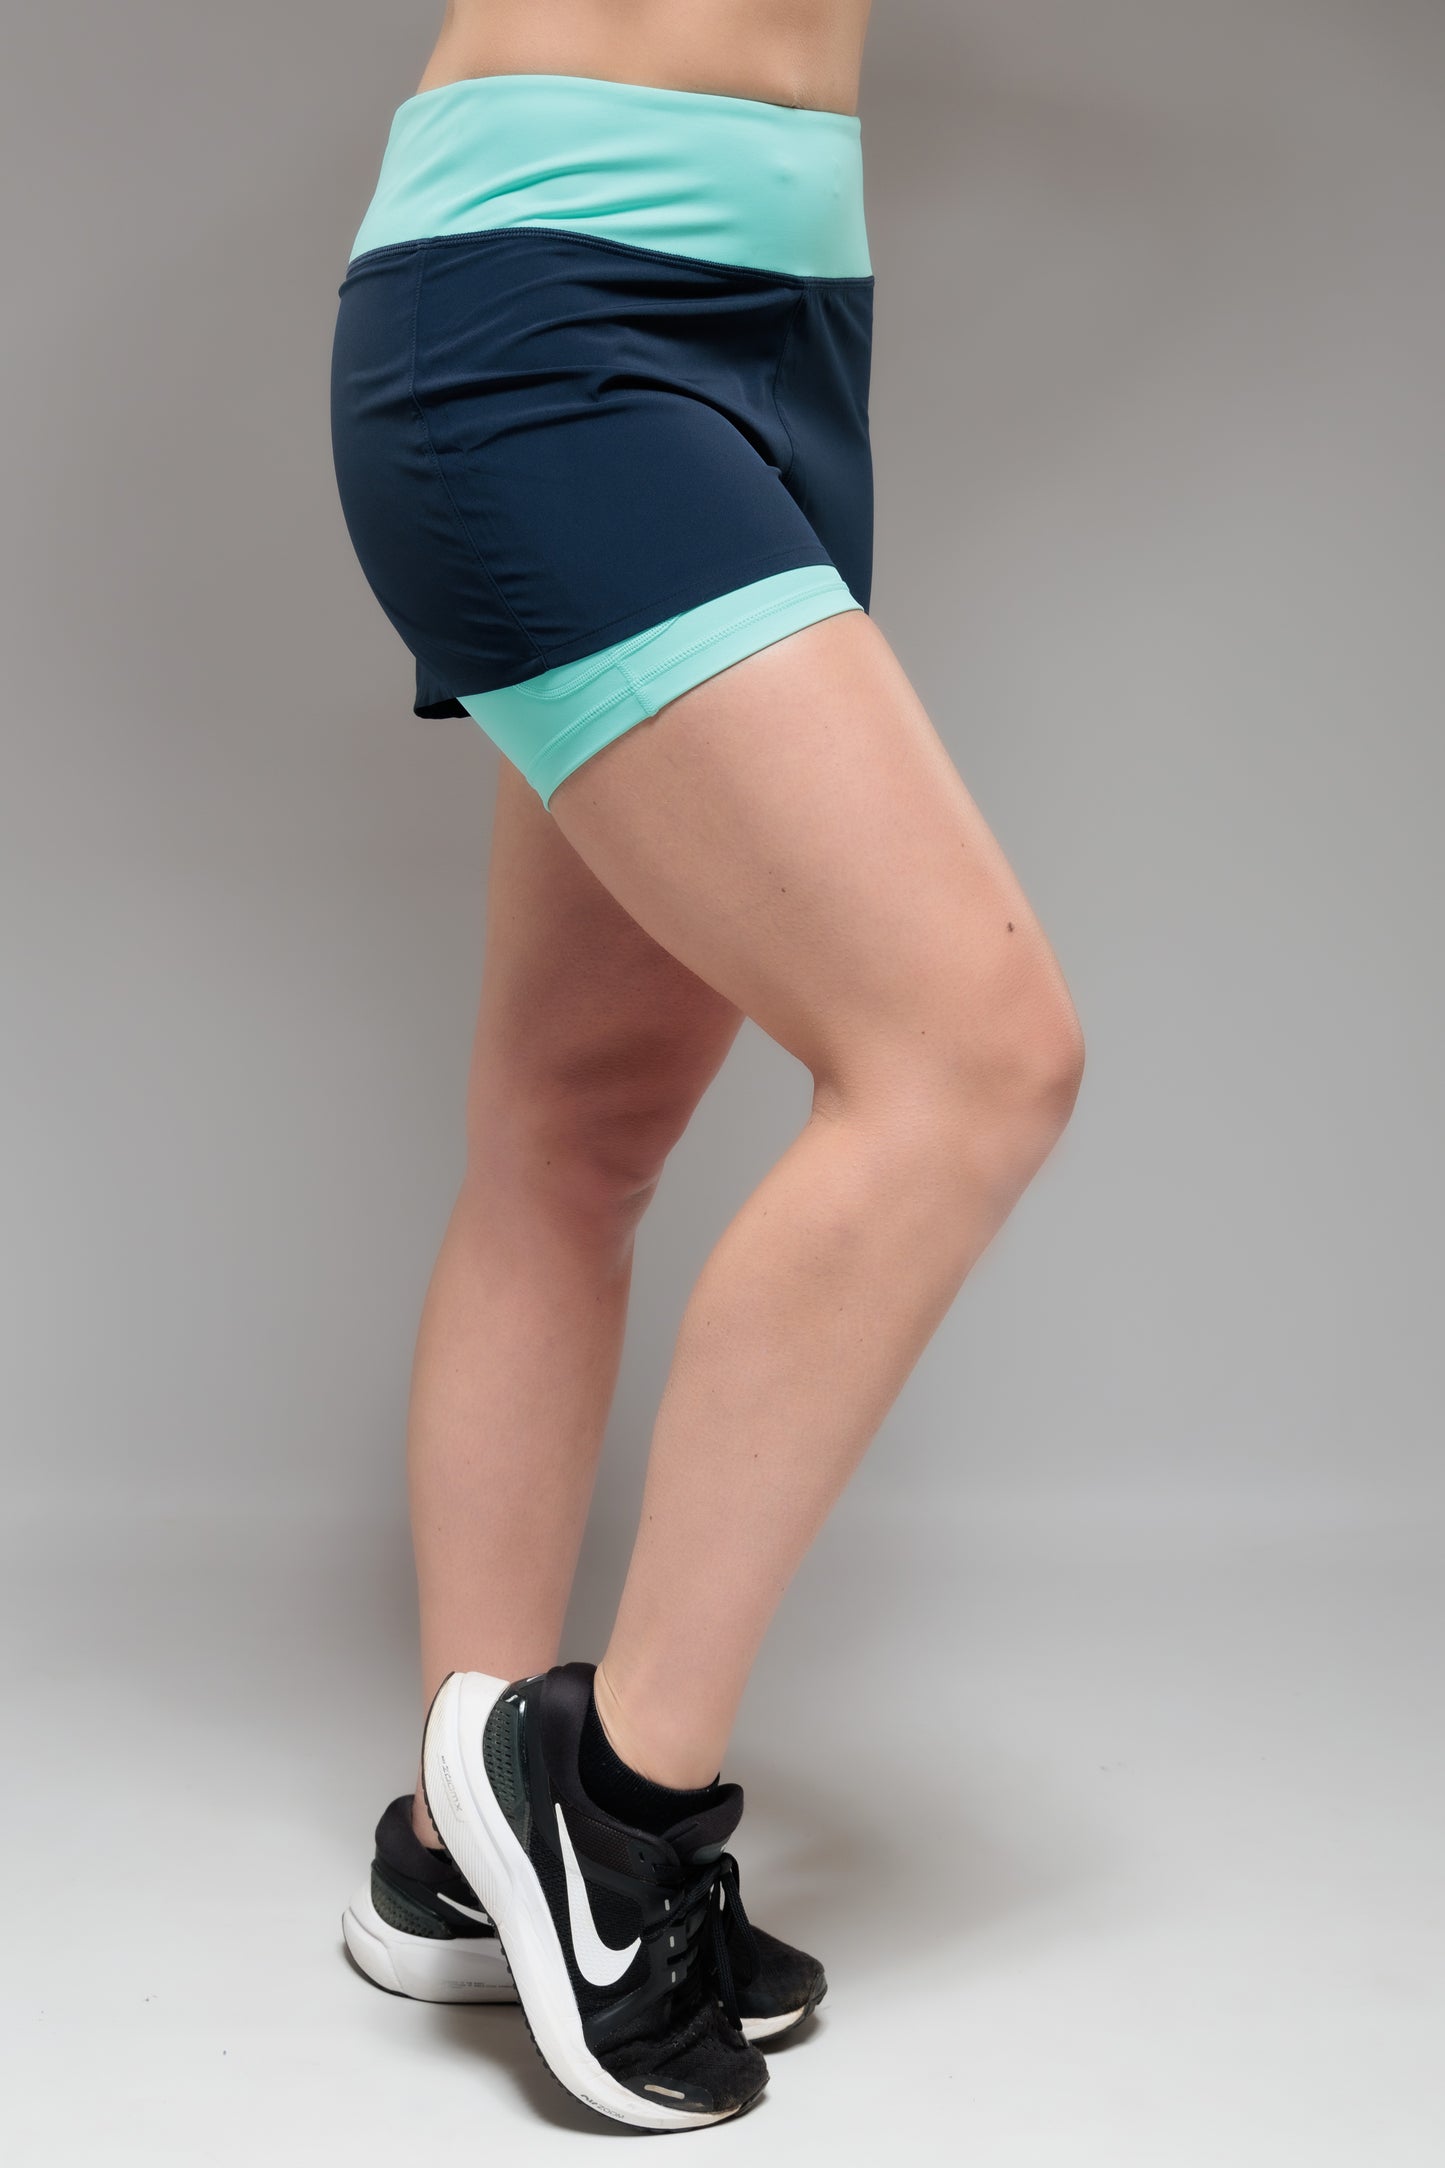 Navy and Peppermint 2-1 Shorts